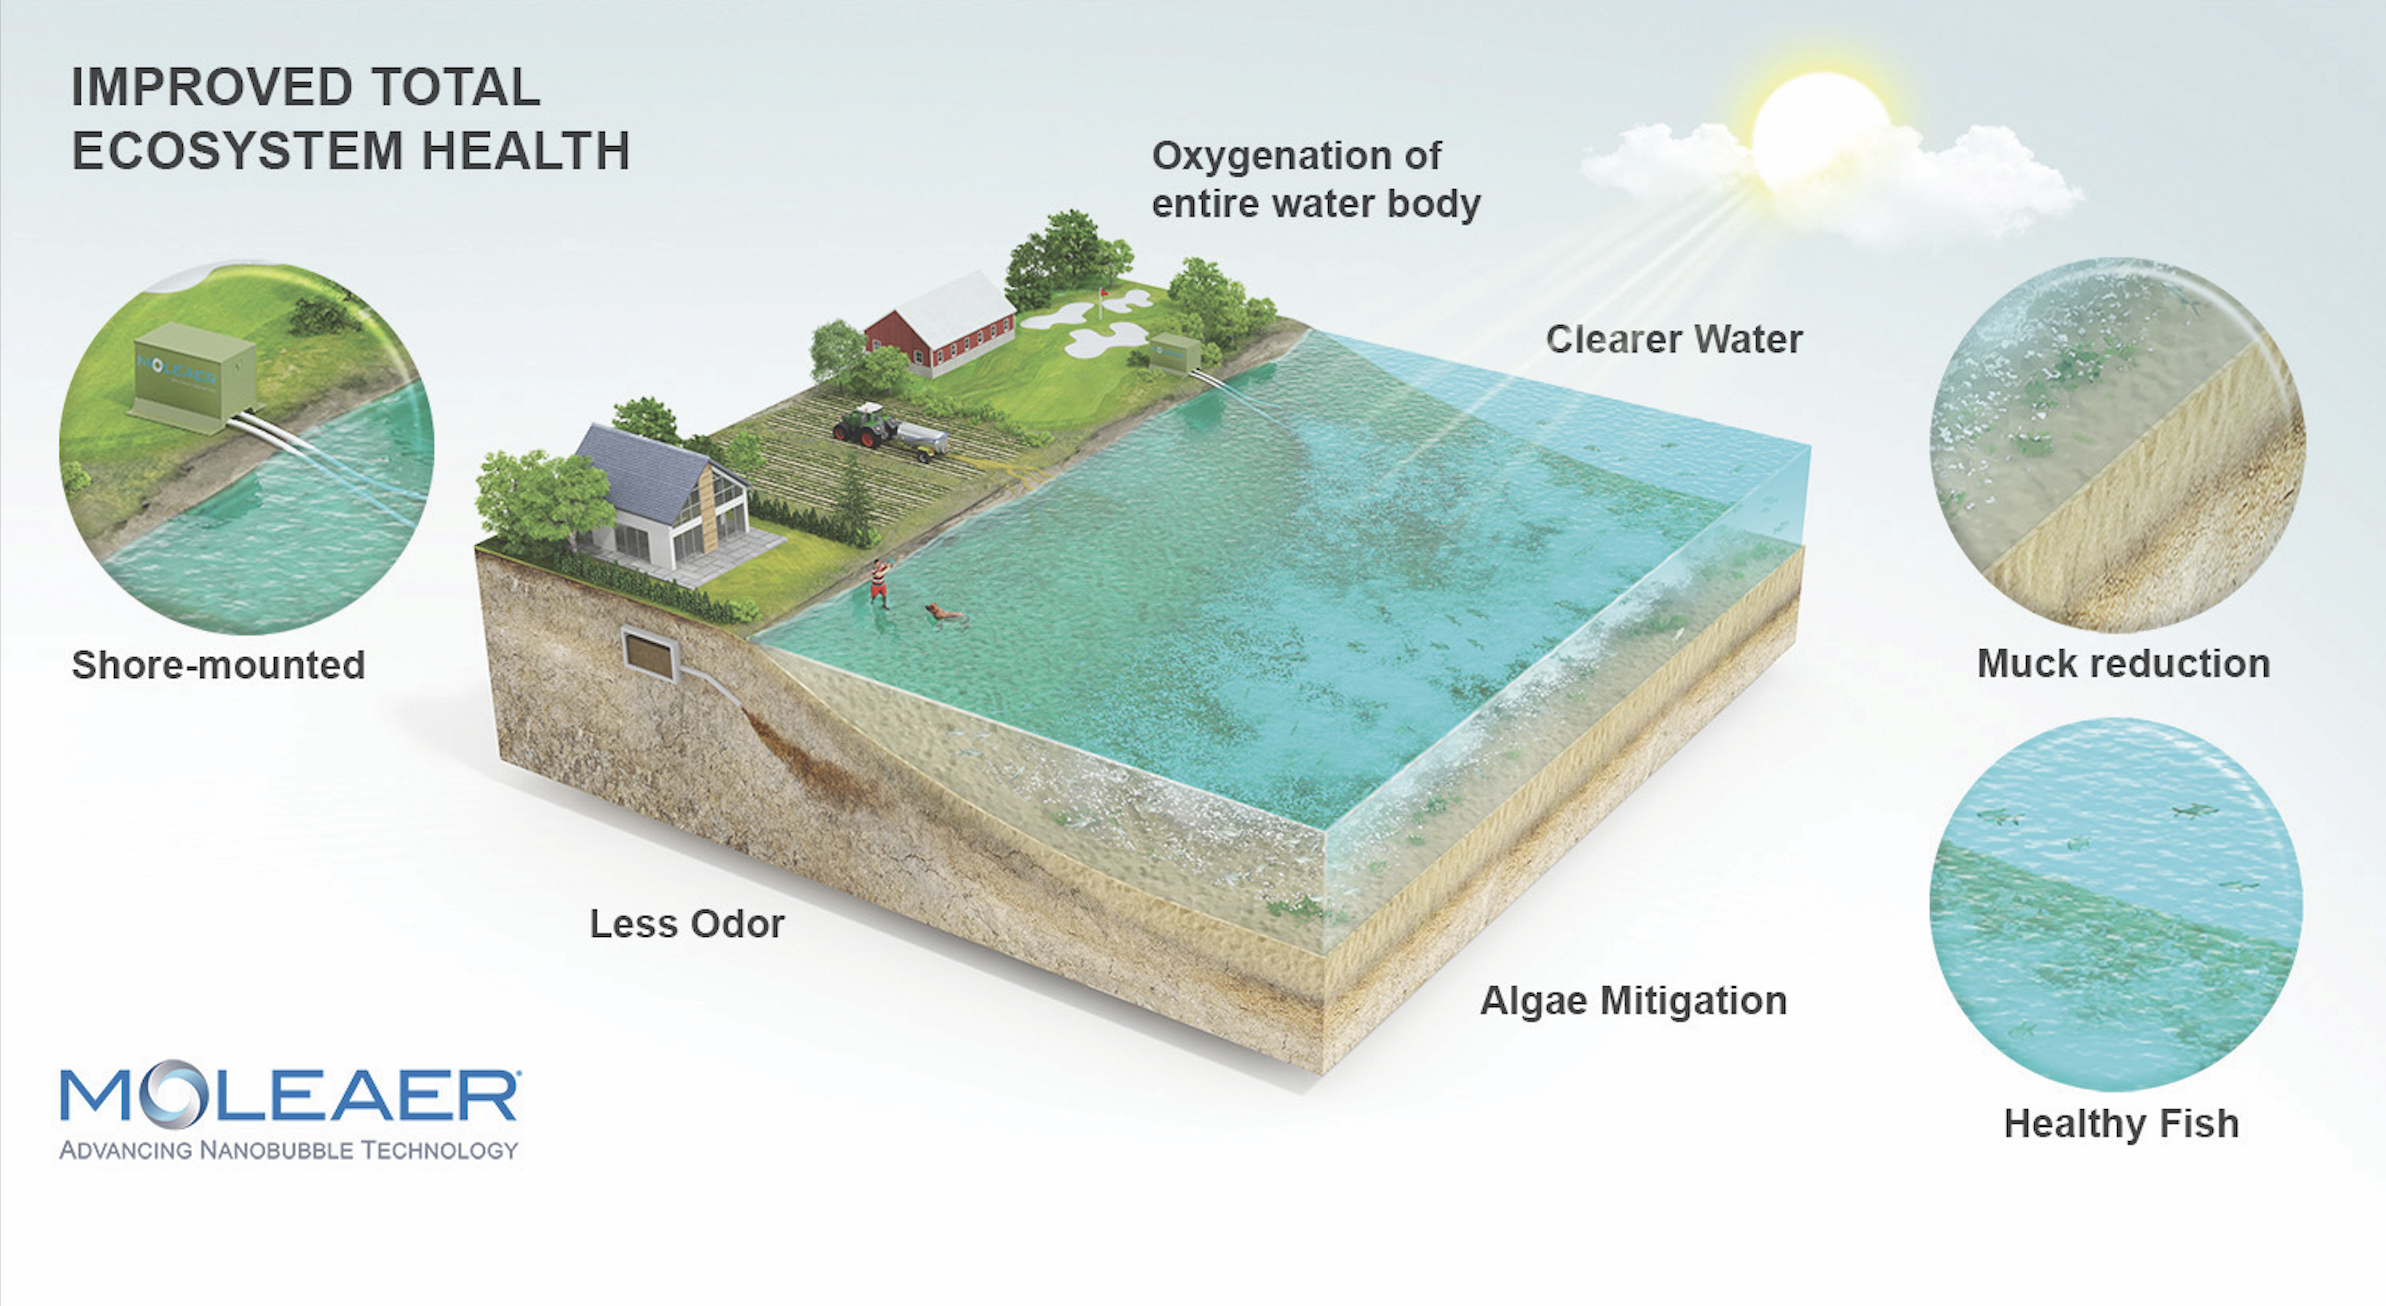 The benefits of nanobubble technology for improved lake ecosystem health.